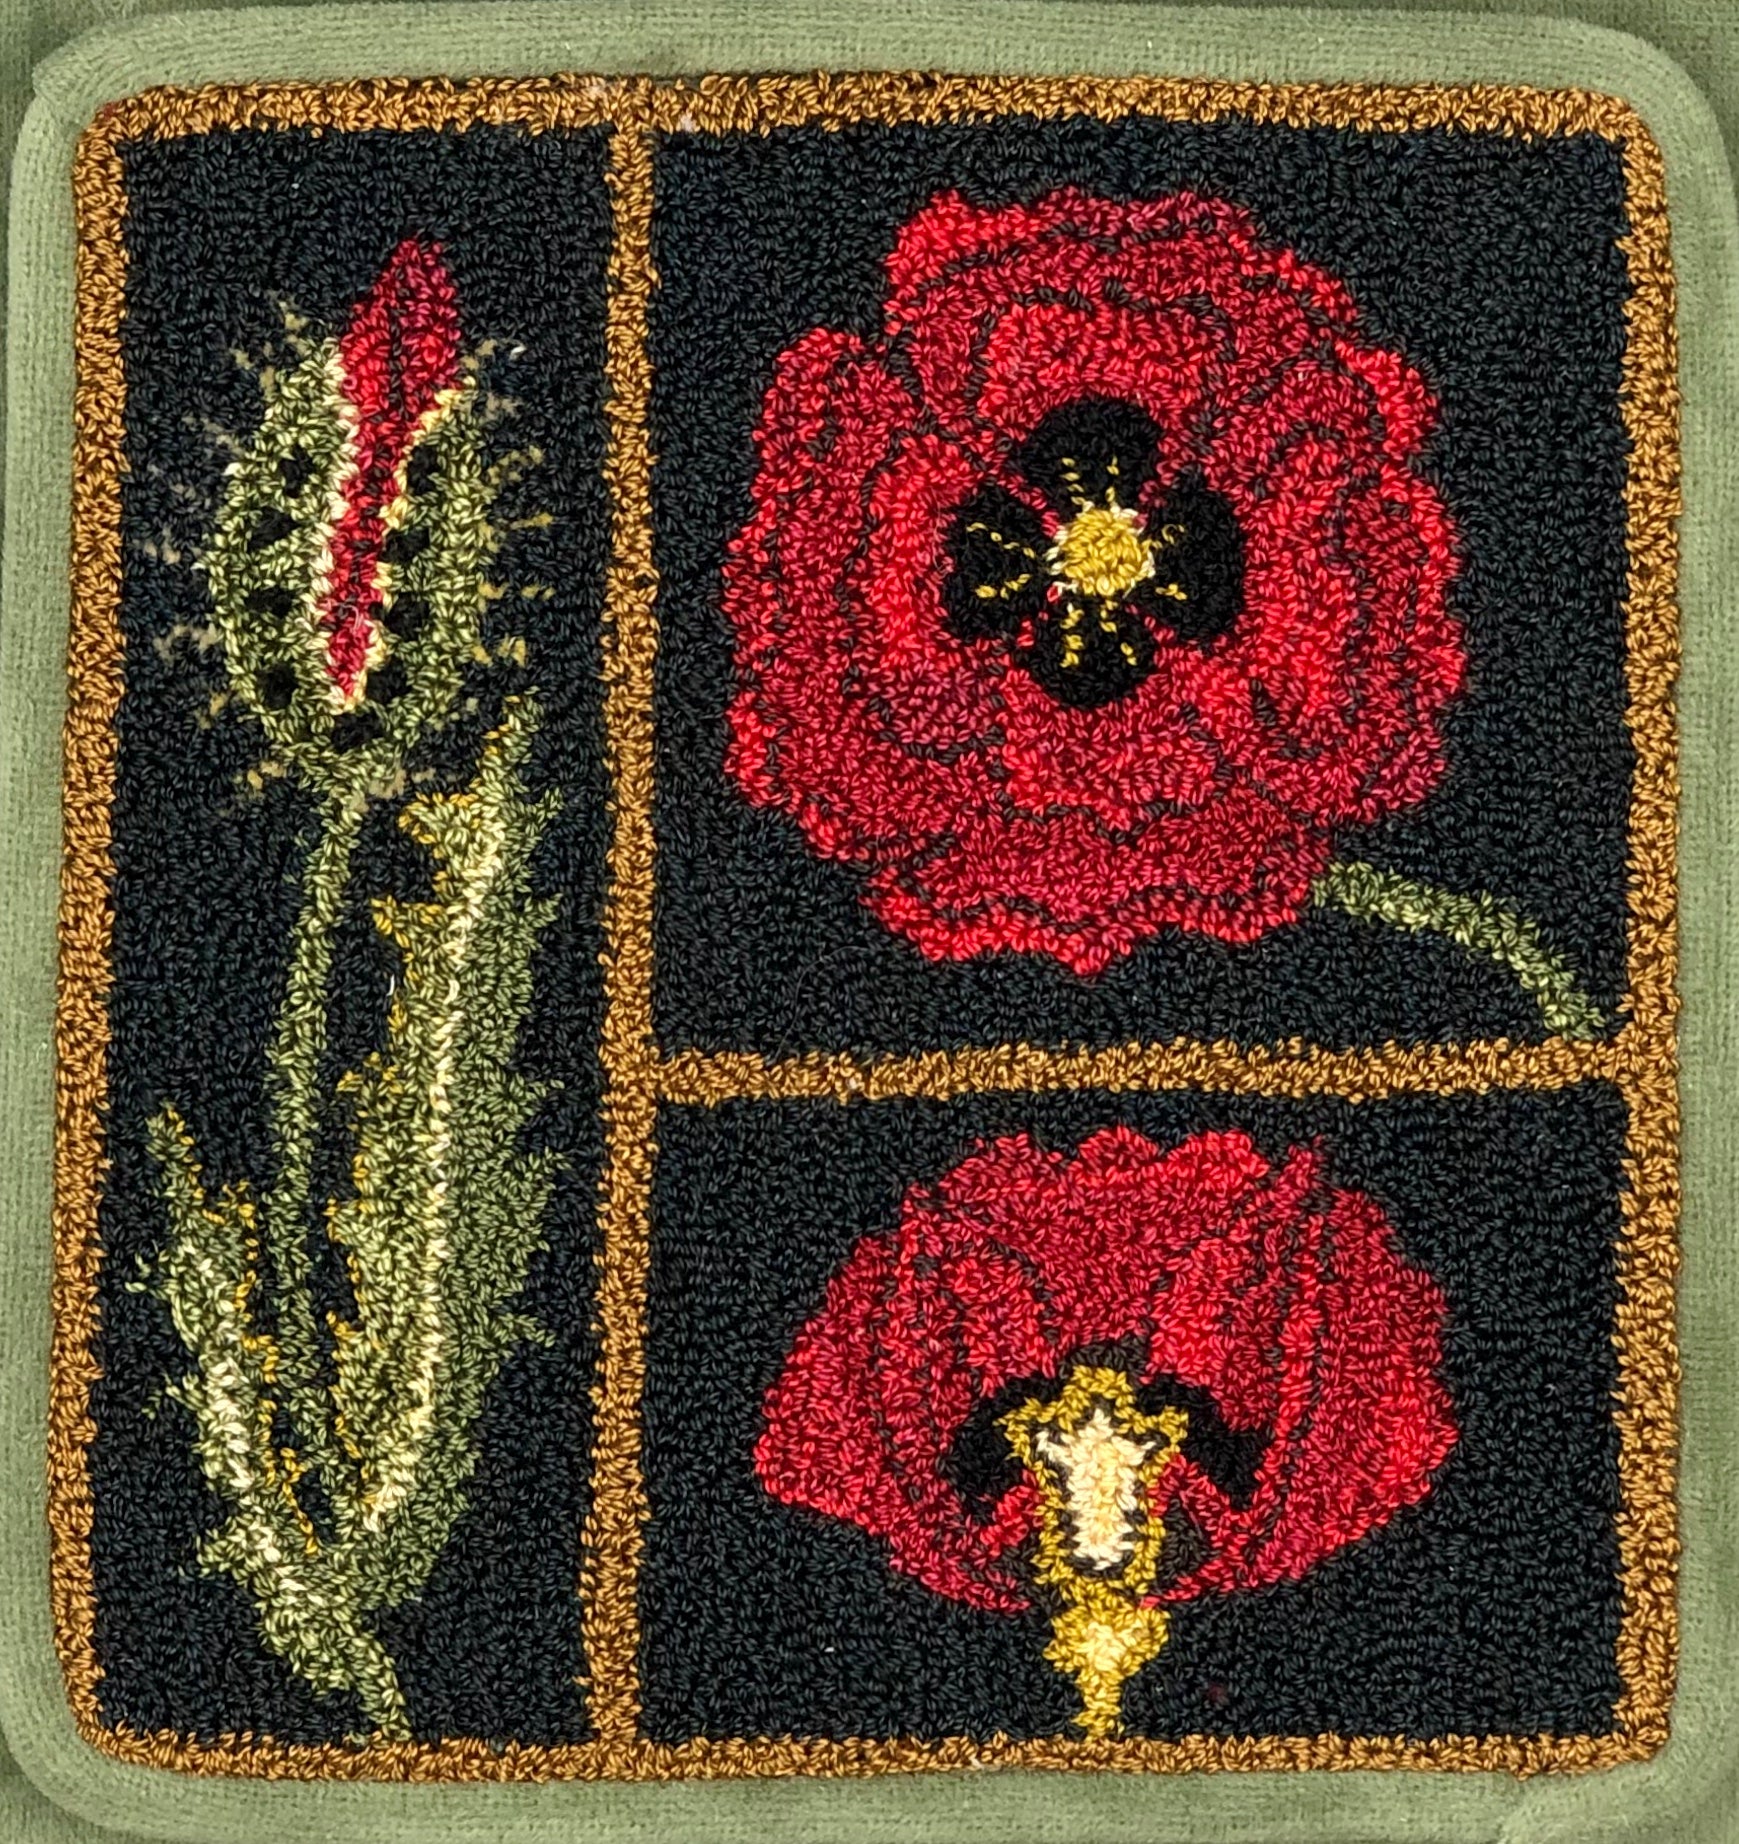 Poppy-PDF Digital Download Punch Needle Pattern by Orphaned Wool. A wonderful botanical pattern with a companion design (Marigold- sold separately). They make a lovely punch needle set of patterns.